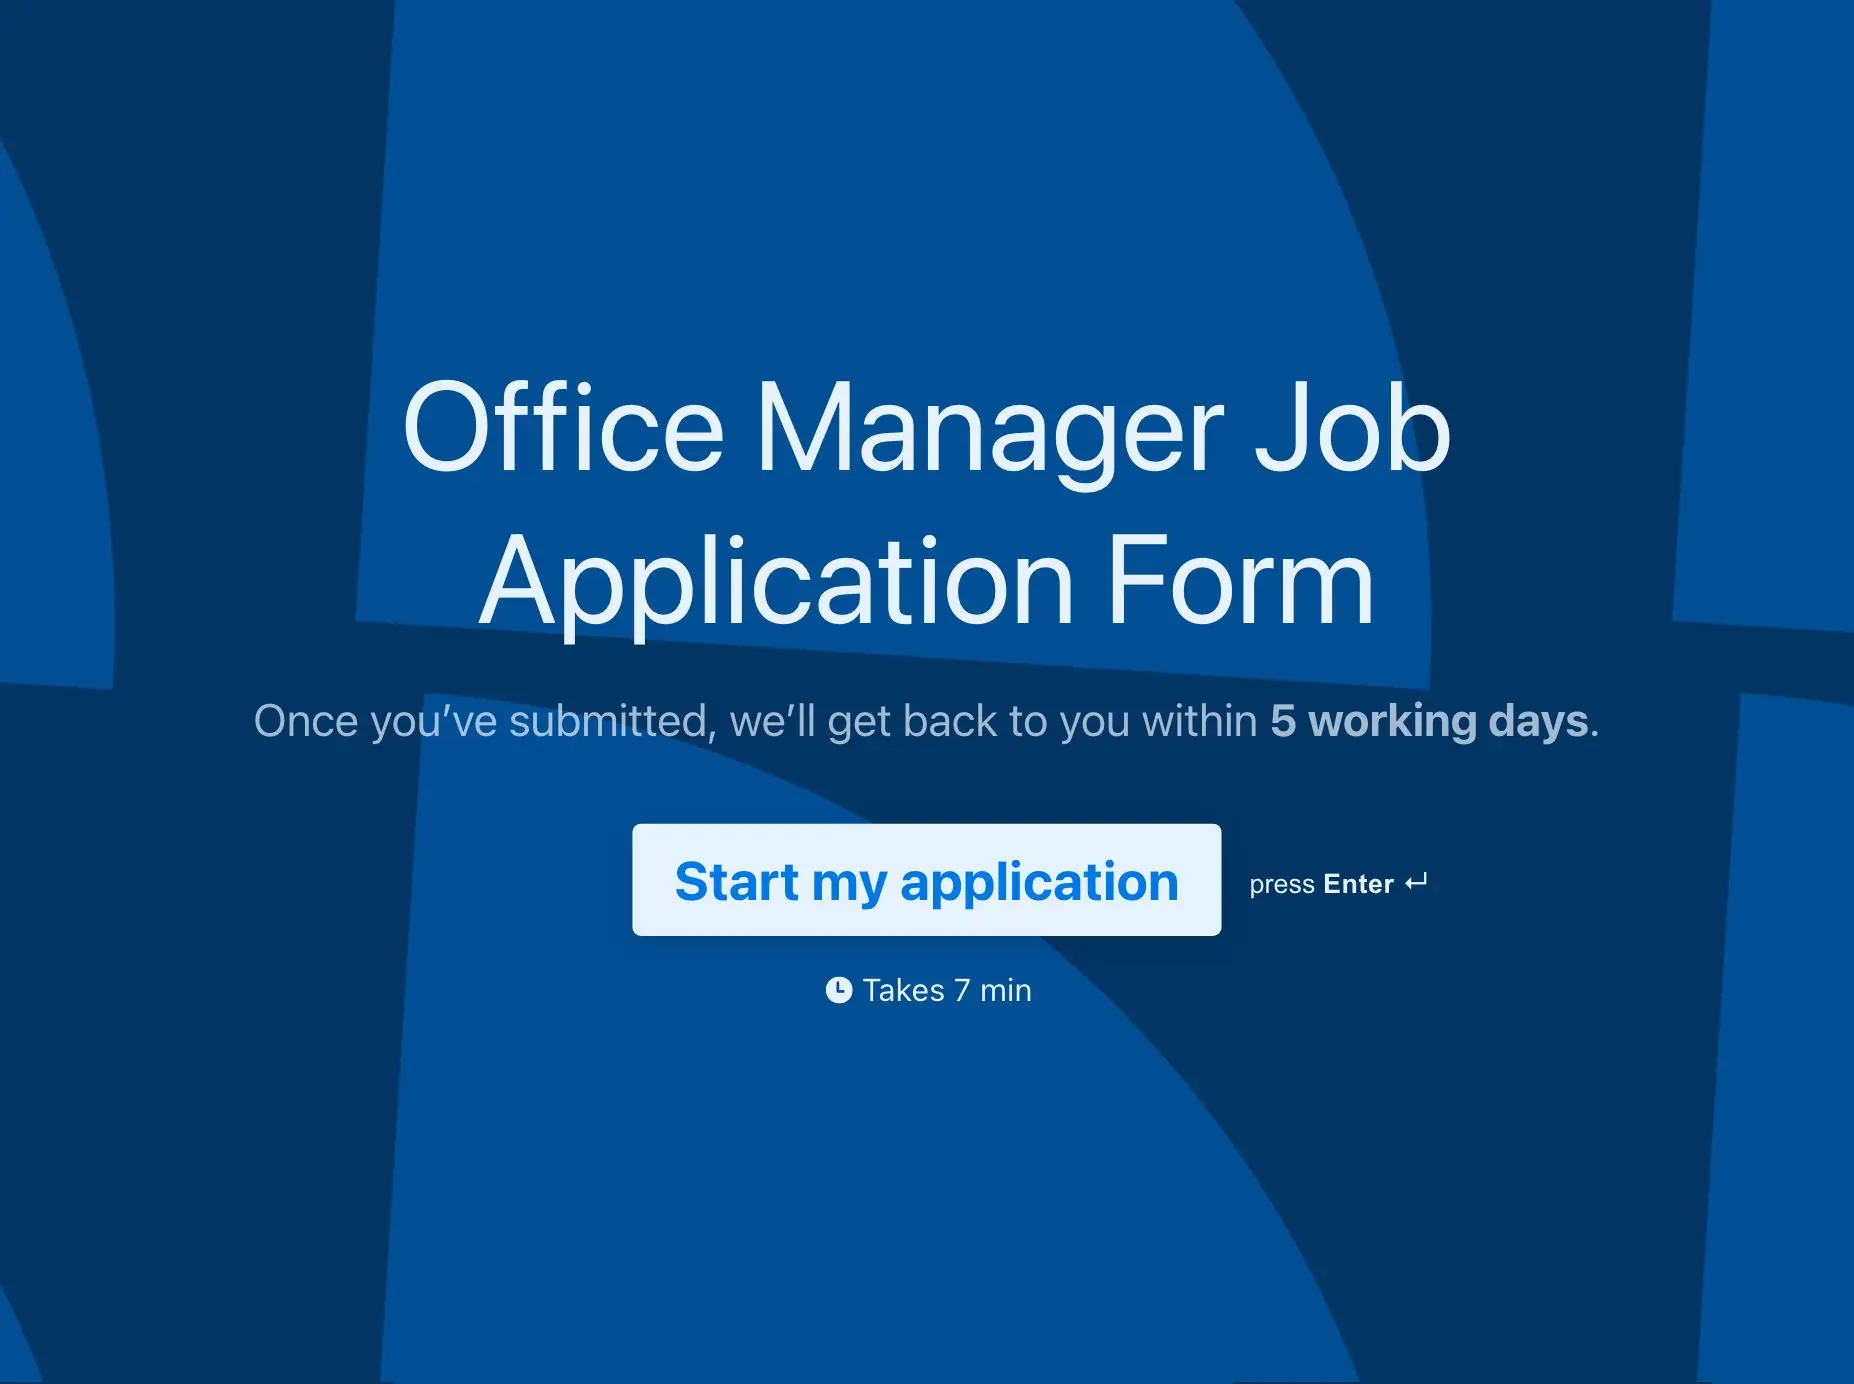 Office Manager Job Application Form Template Hero